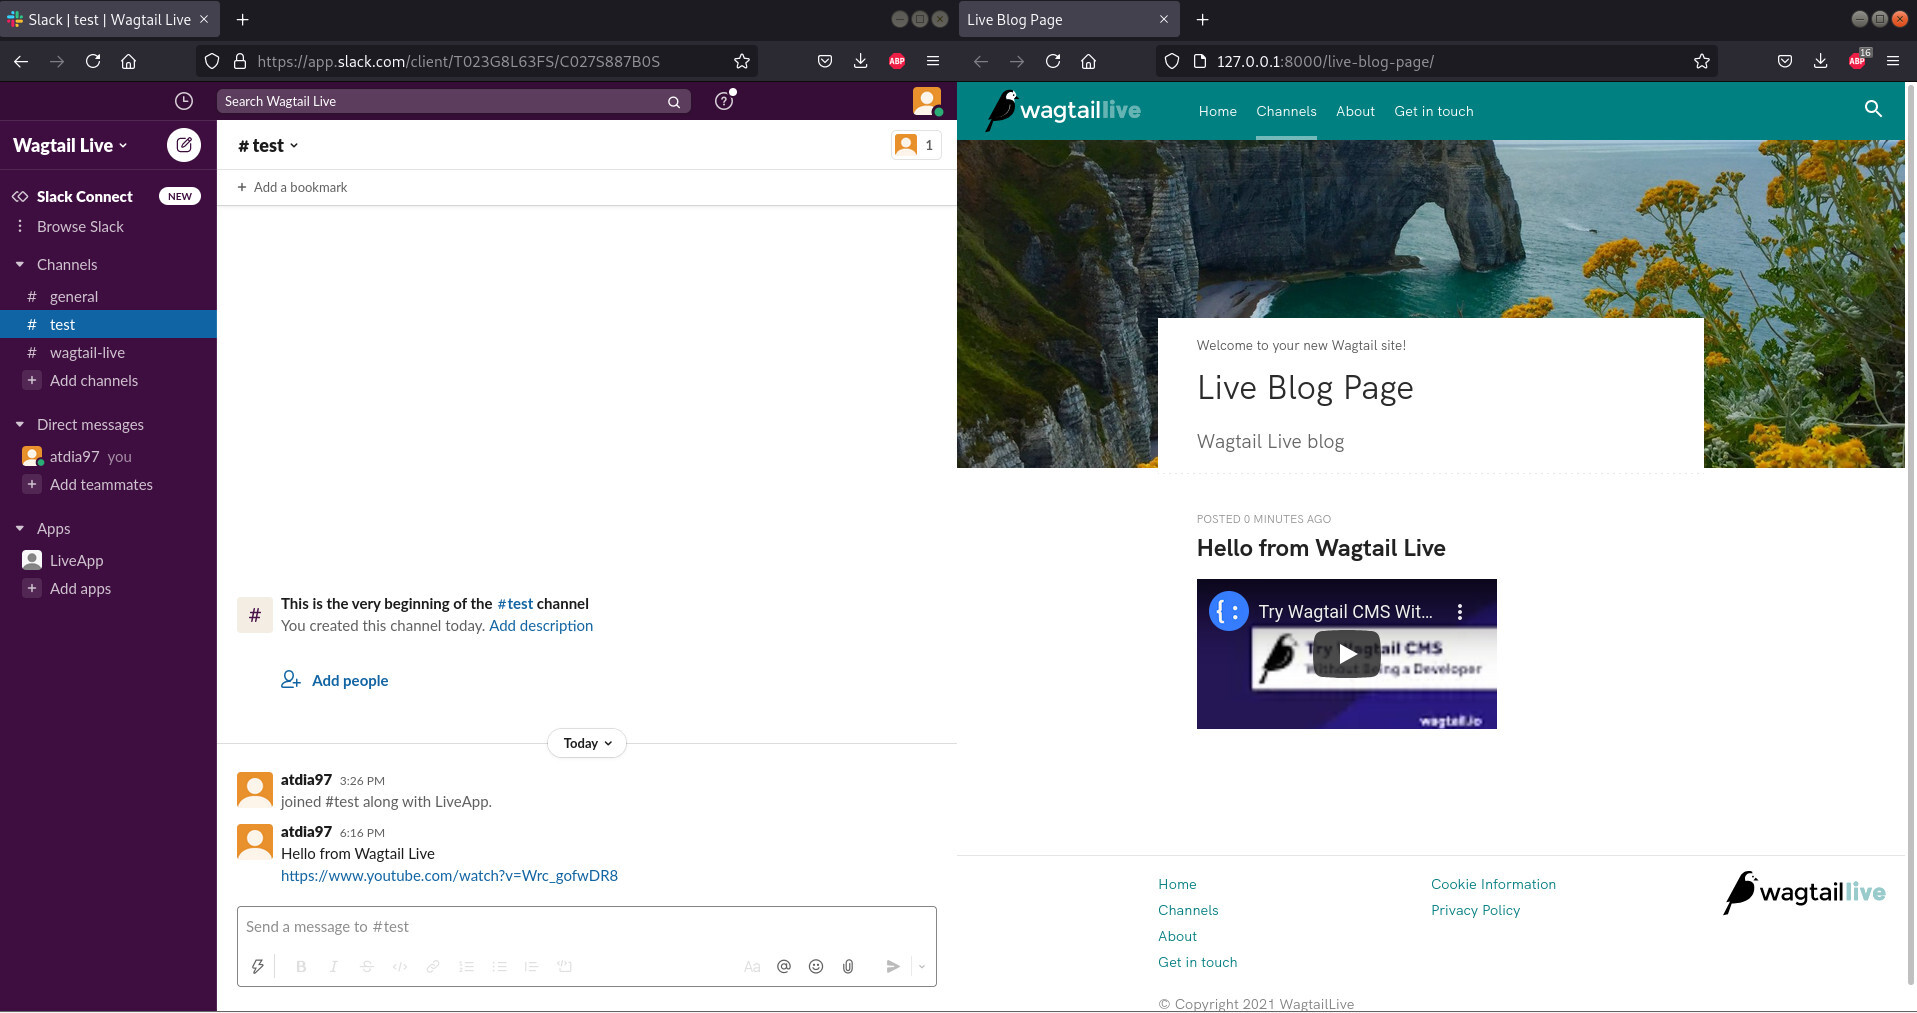 Wagtail Live: Slack and live blog page